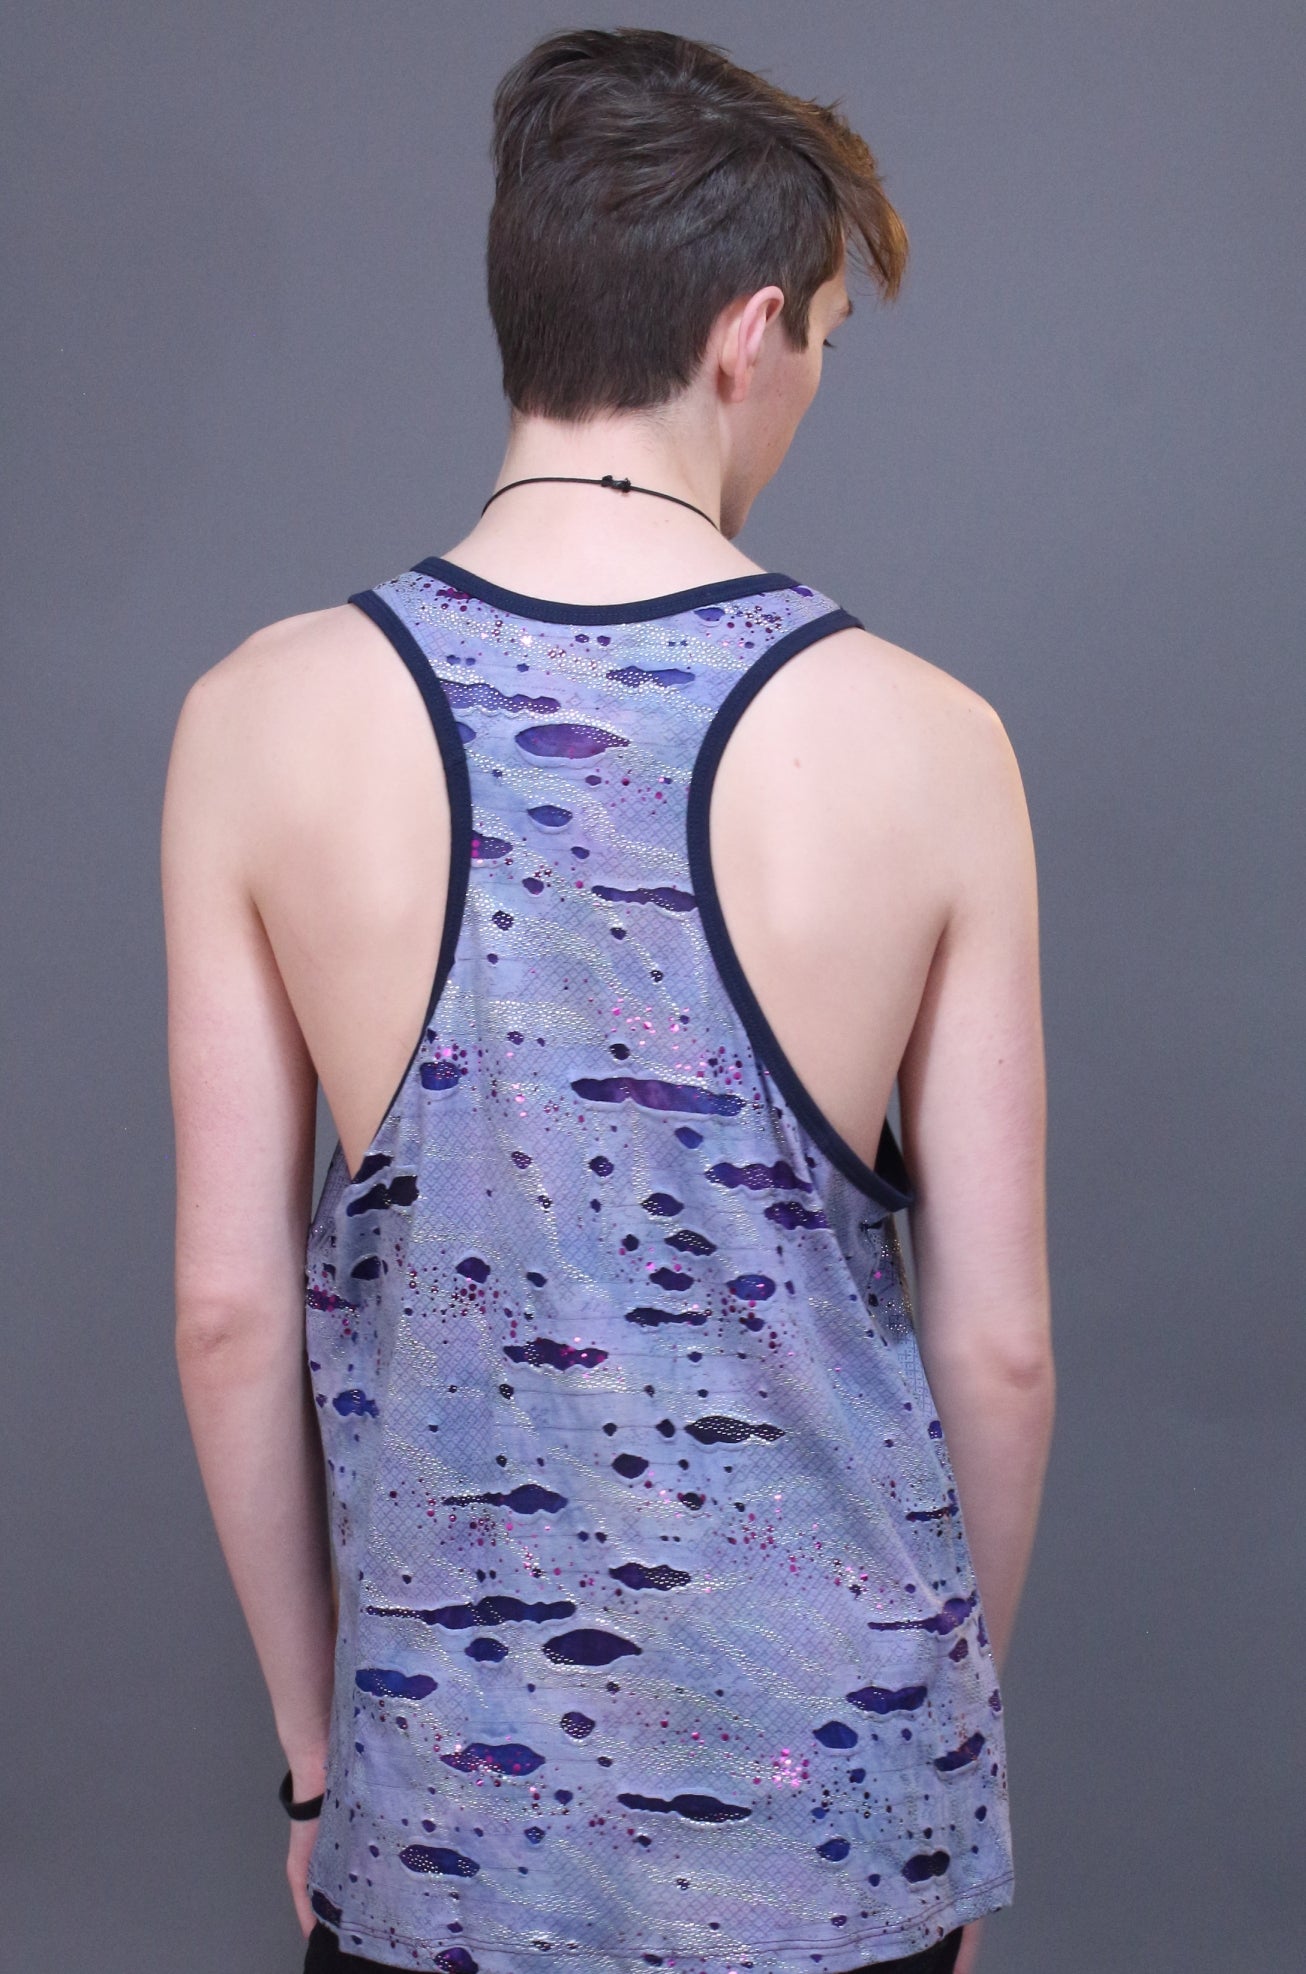 Distressed tank by Mission